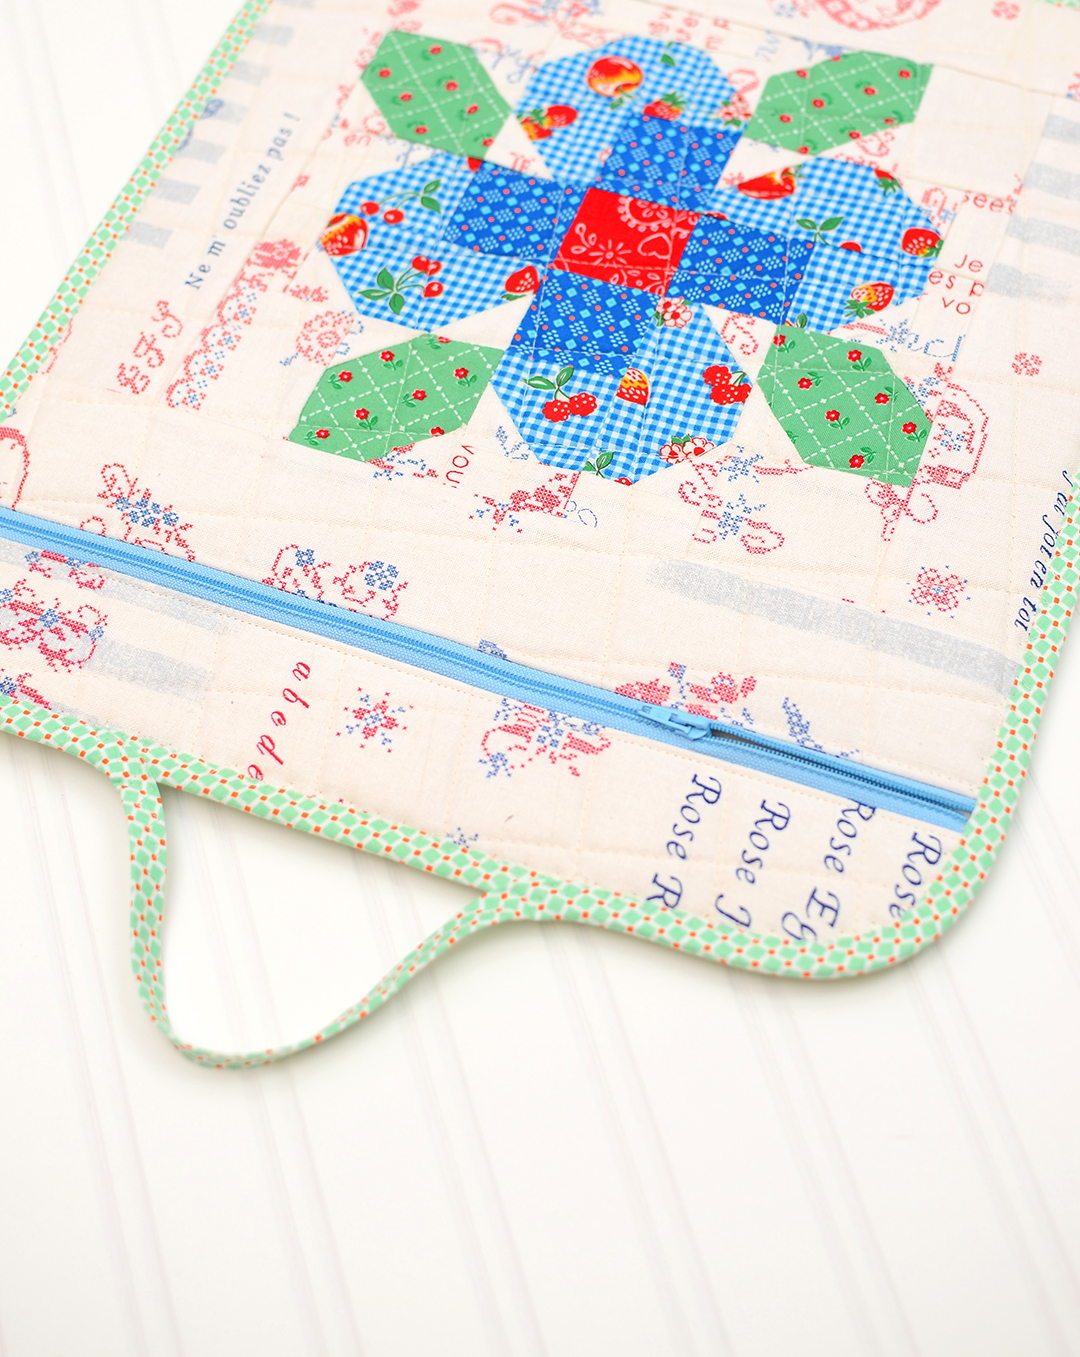 Quilted Gift Bag Pattern - An easy quilt pattern add-on by Nadra Ridgeway of ellis & higgs